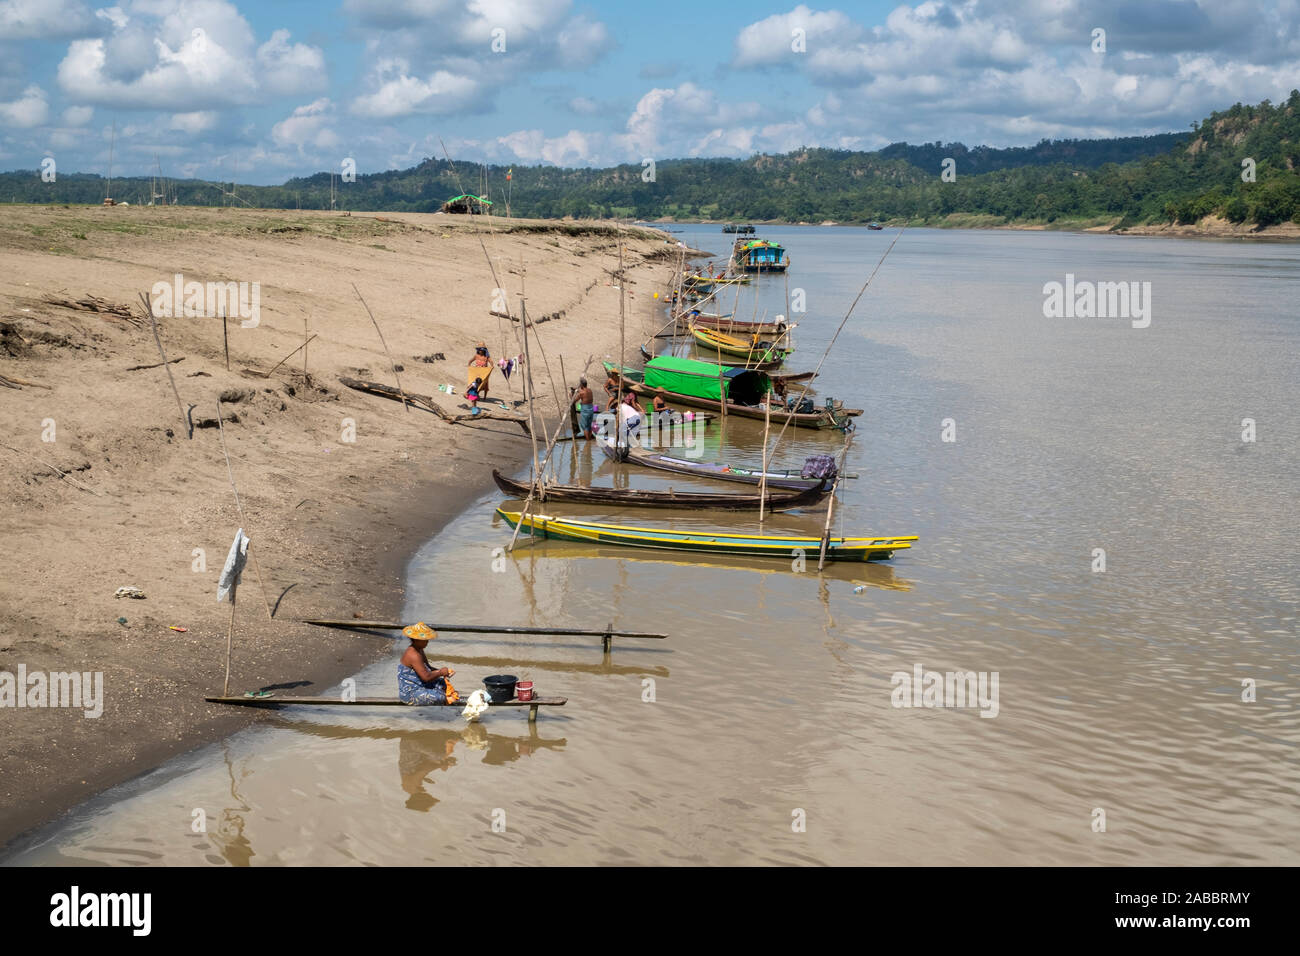 Small boats line the shoreline of the Chindwin River in northeastern Myanmar (Burma) while local residents wash their laundry in the river. Stock Photo